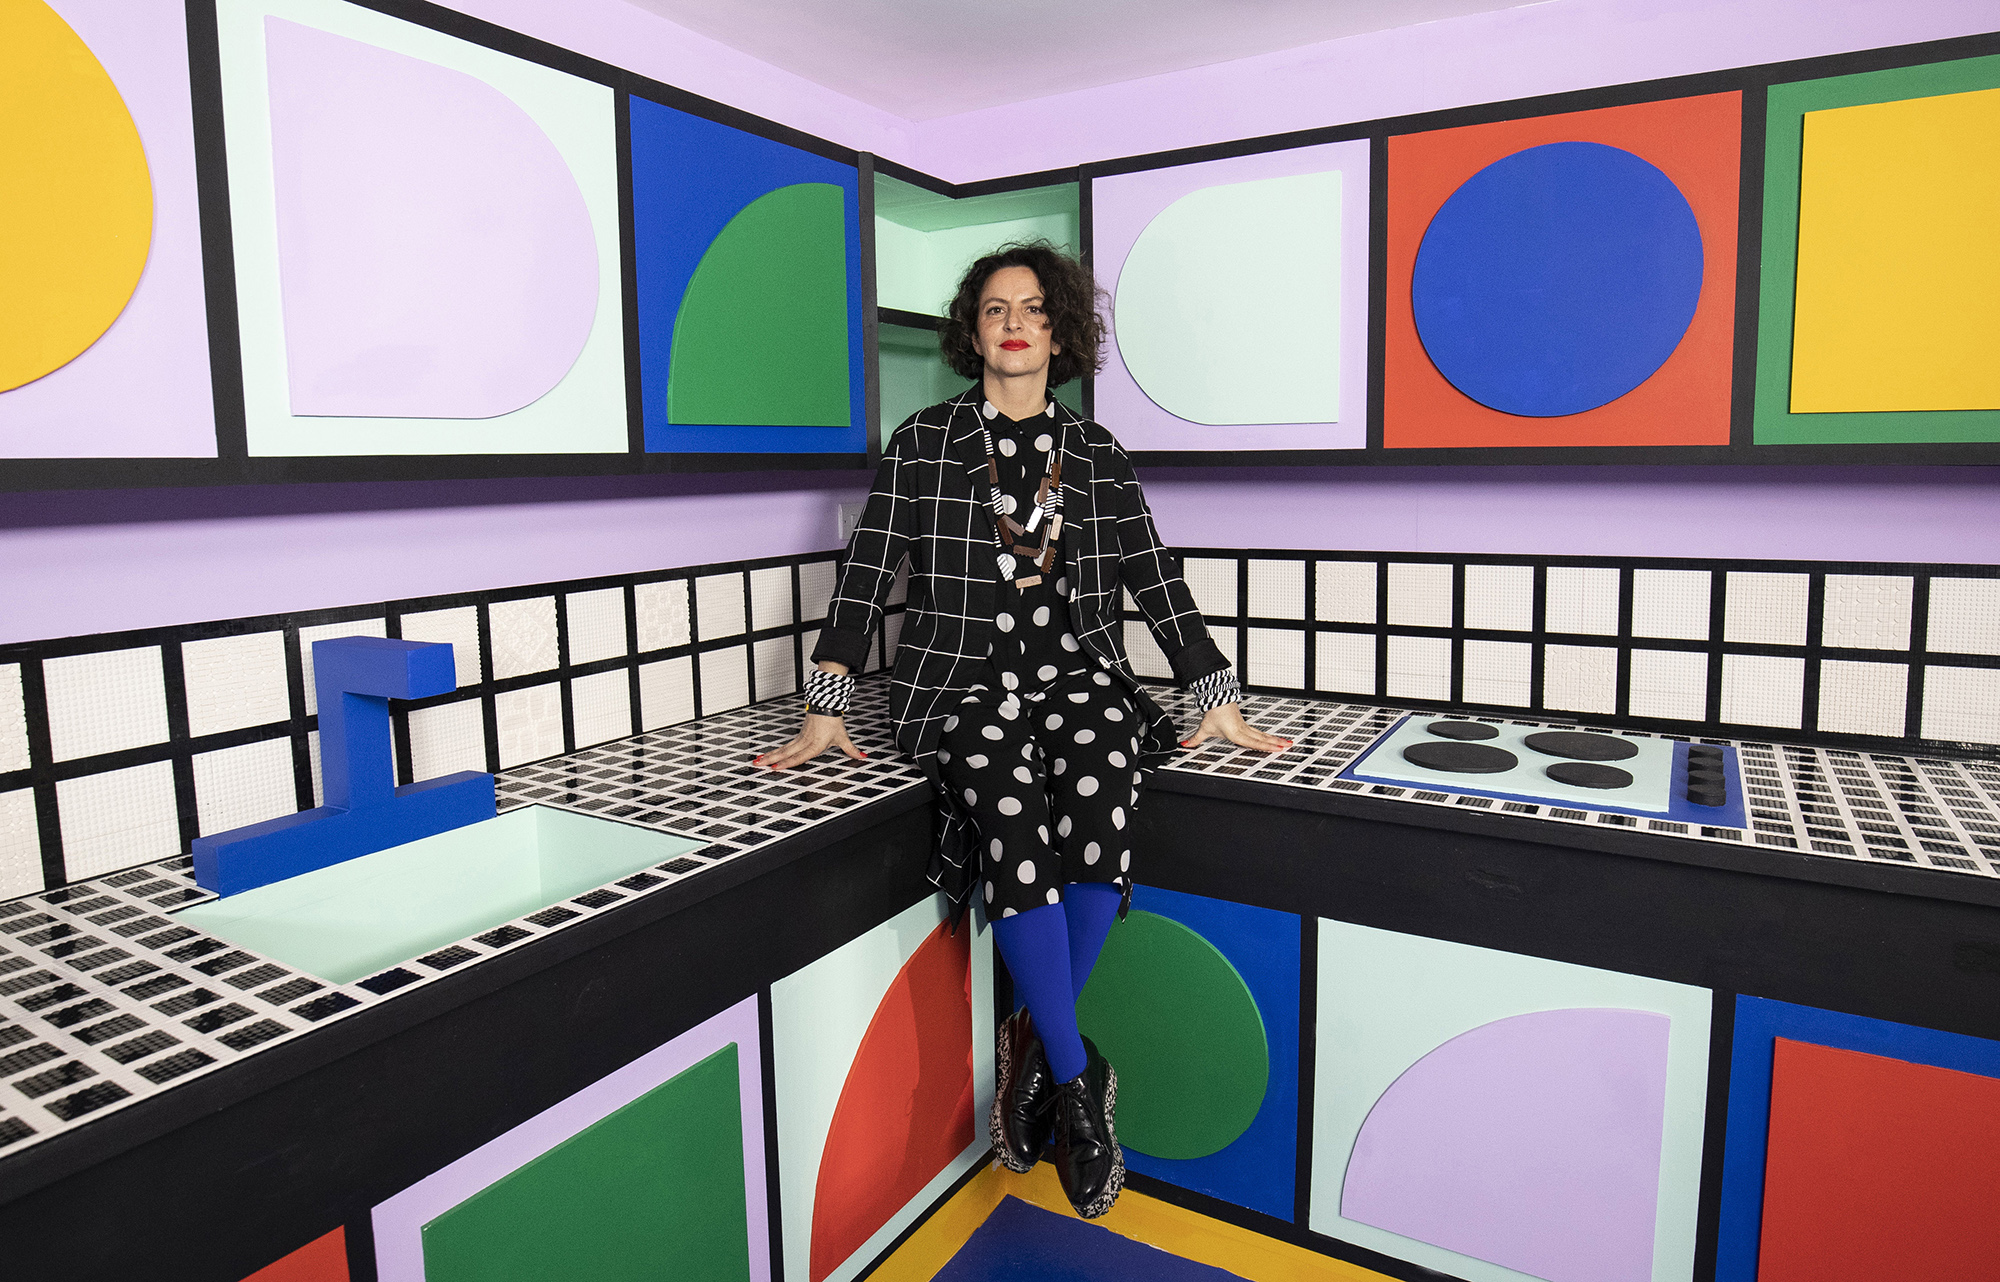 LEGO Group X Camille Walala: “HOUSE OF DOTS”